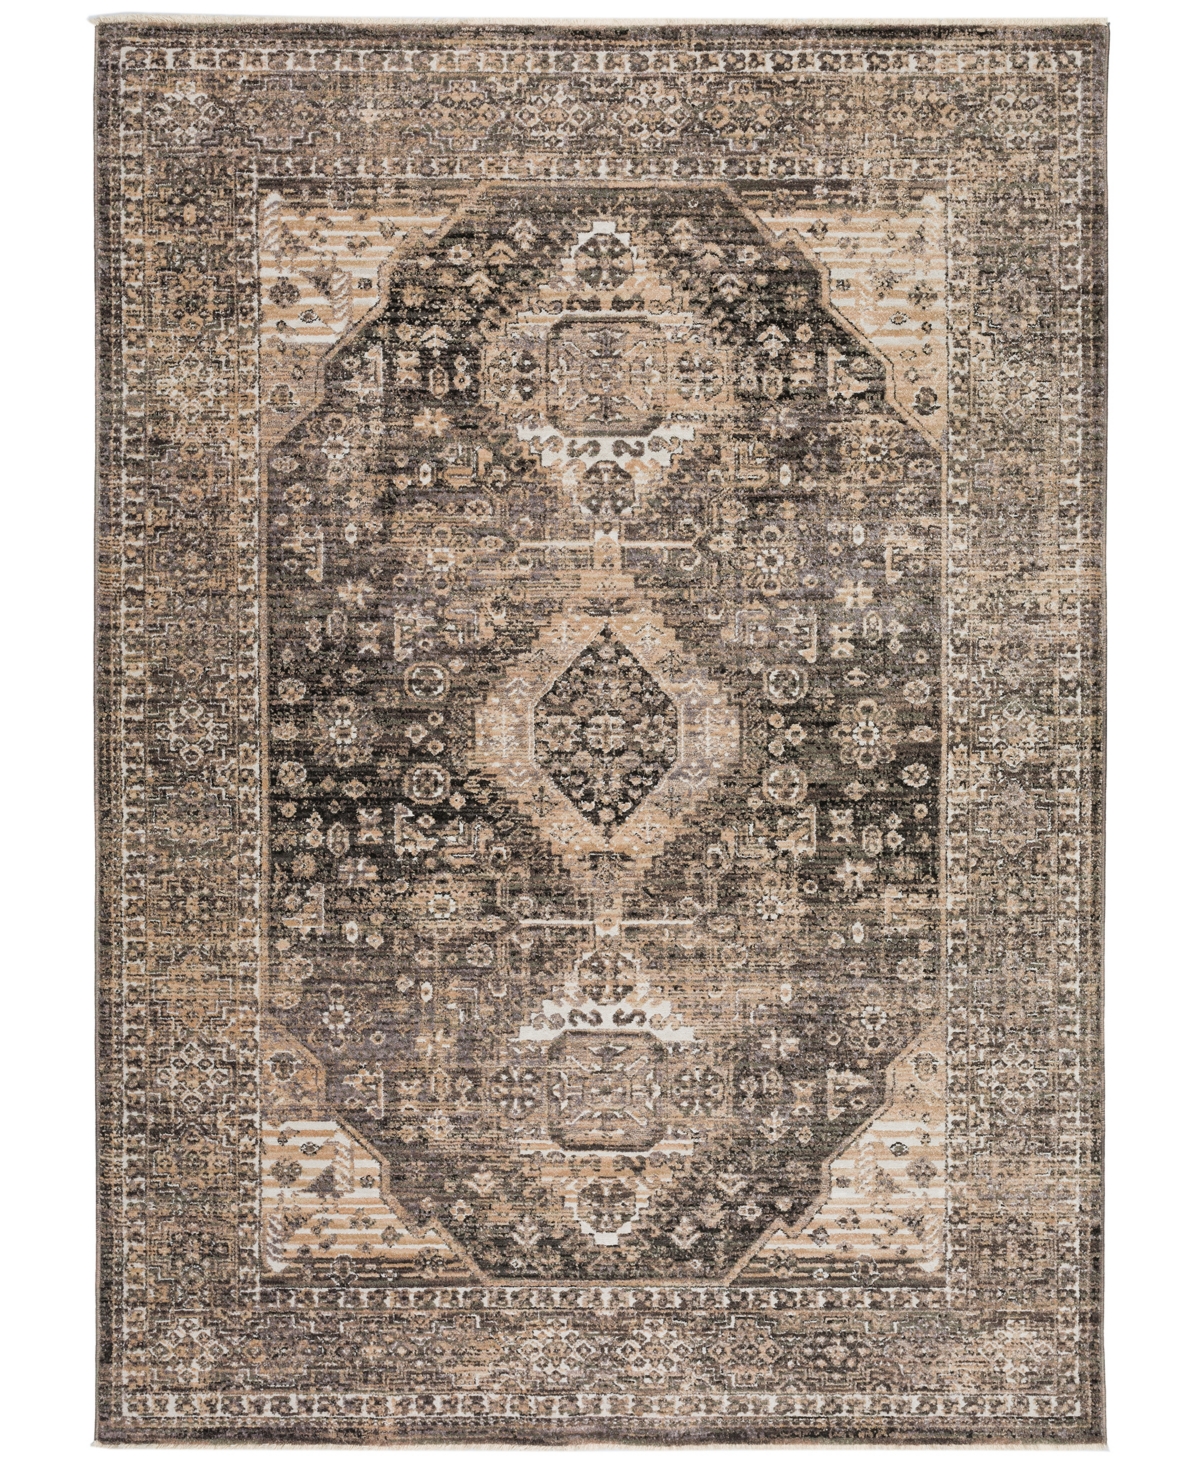 D Style Sergey Sgy2 5' X 7'6" Area Rug In Charcoal